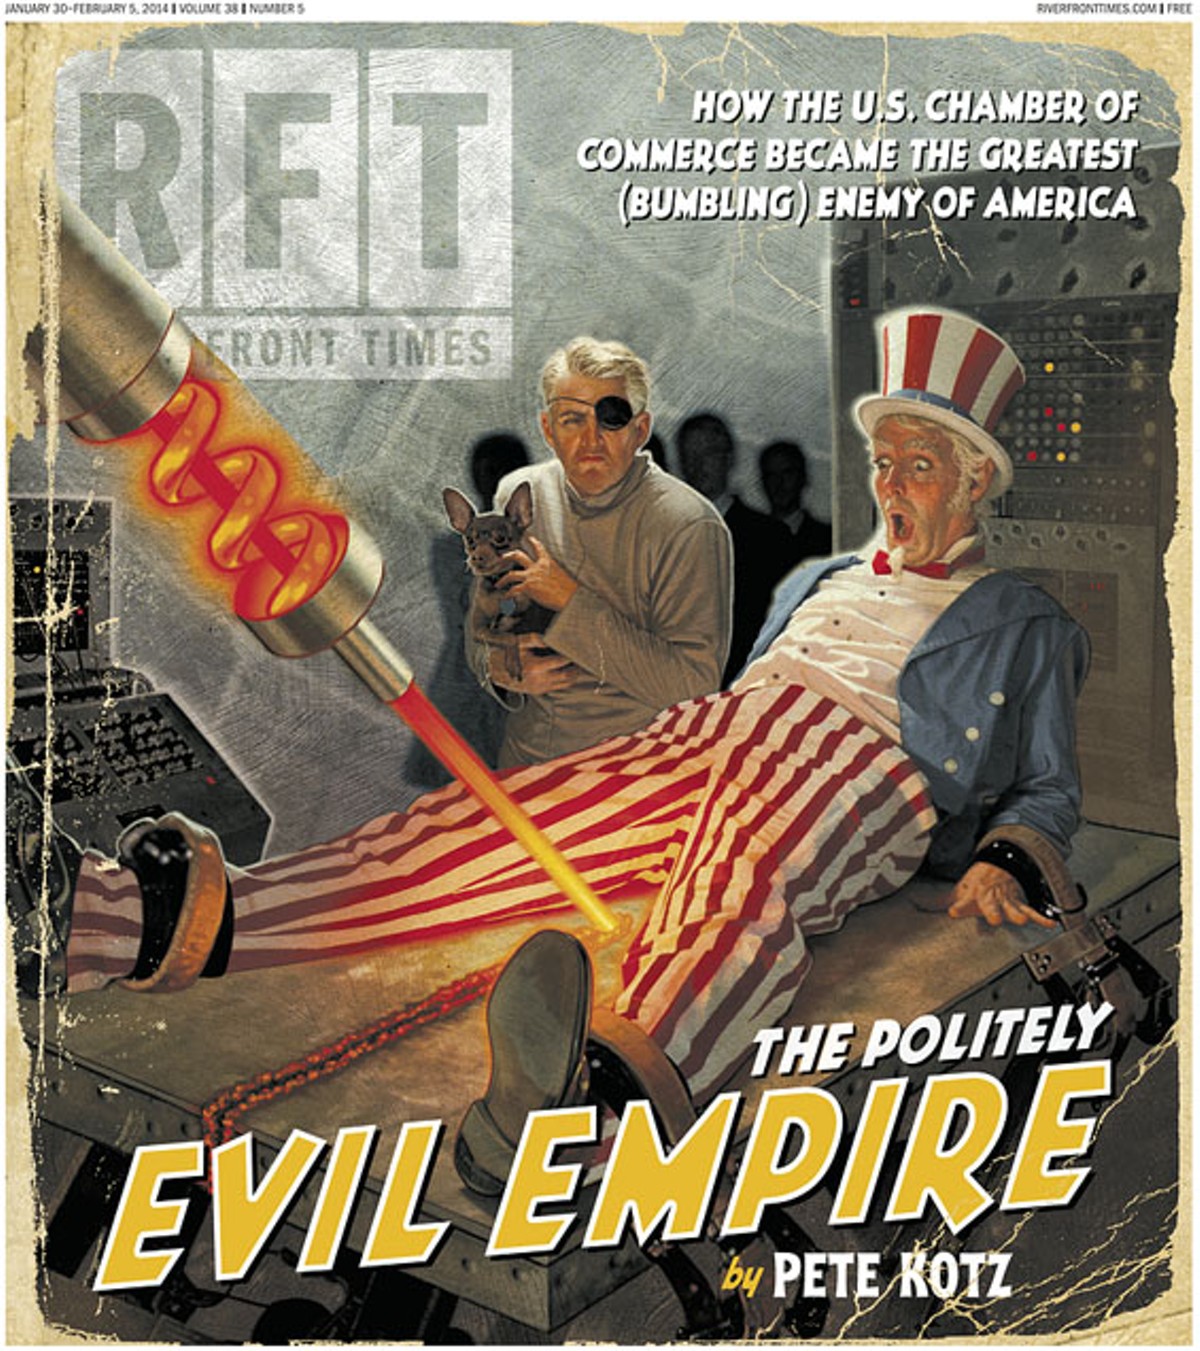 The Cover of the January 30 Print Edition